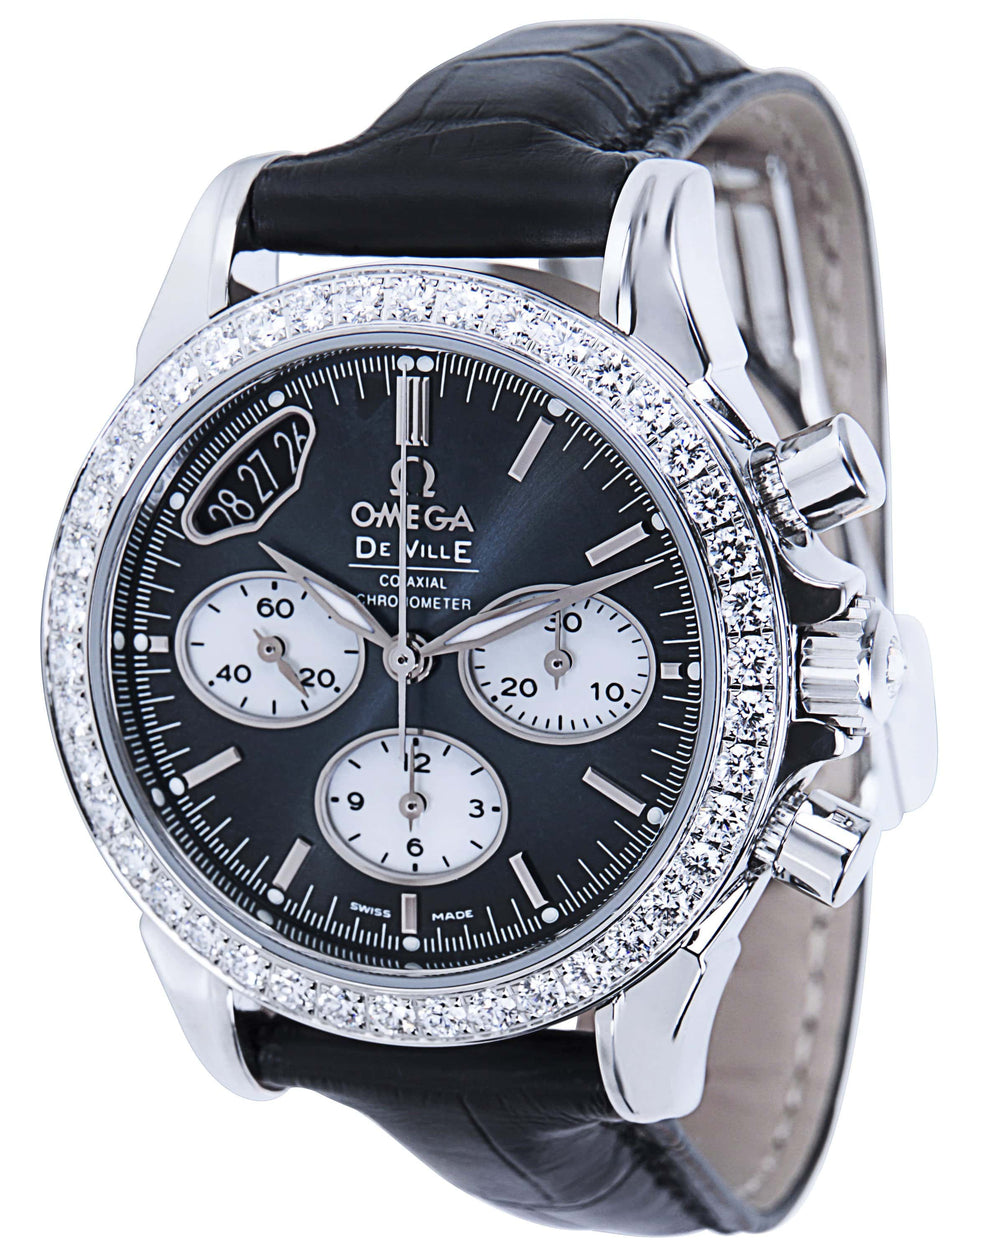 OMEGA De Ville Chronograph Co-Axial 35mm Stainless Steel Diamond / Grey / Strap 422.18.35.50.06.001 2